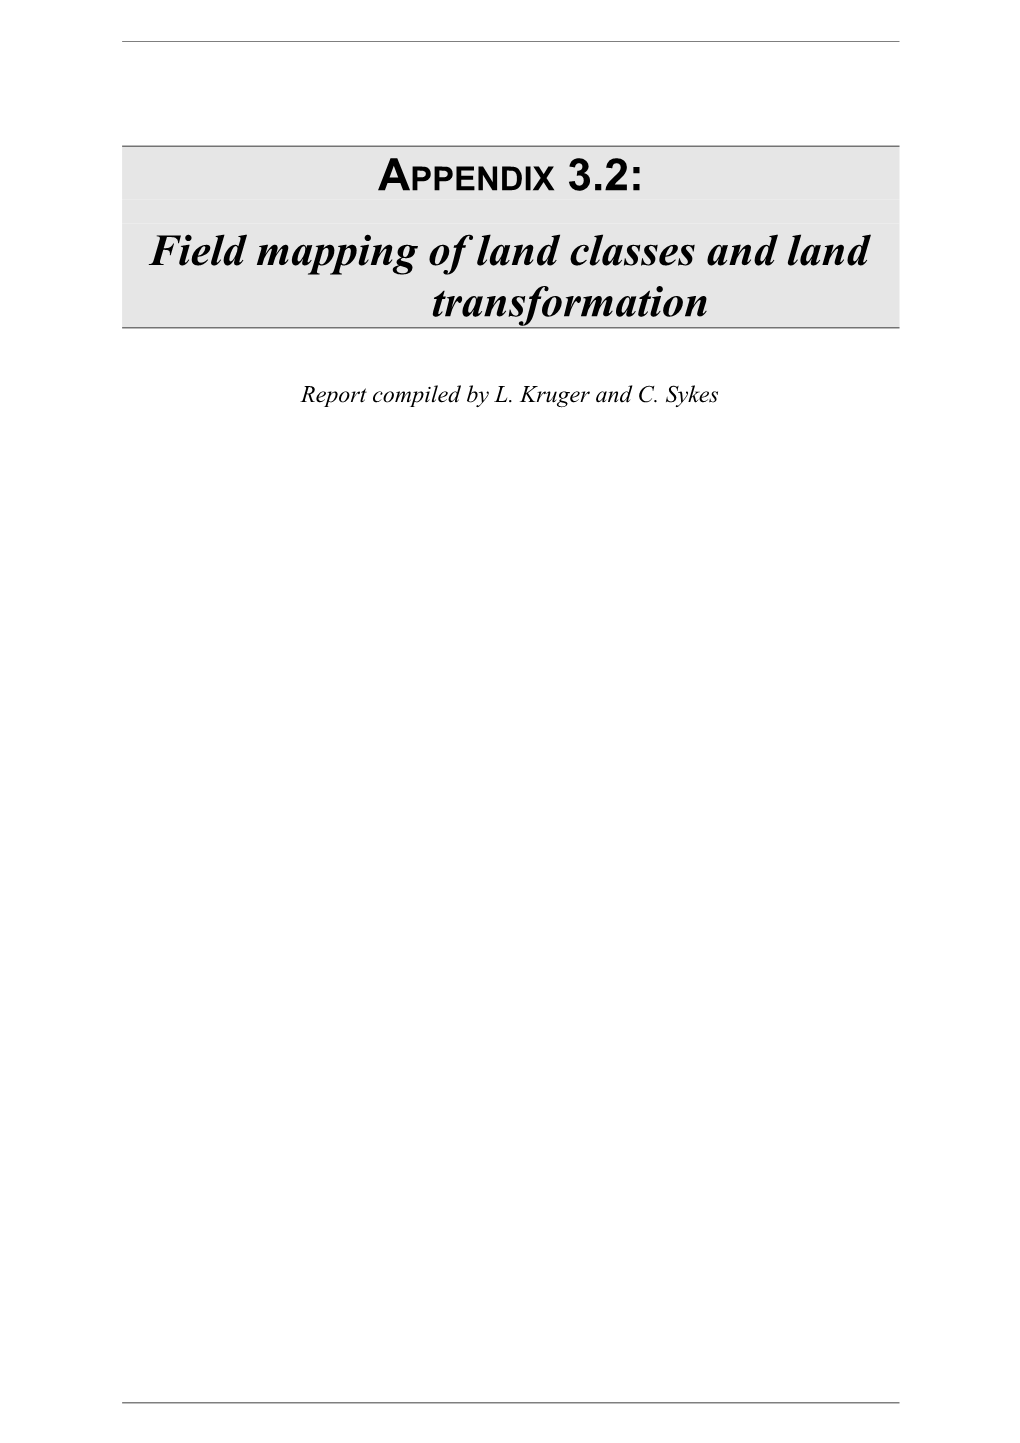 Field Mapping of Land Classes and Land Transformation